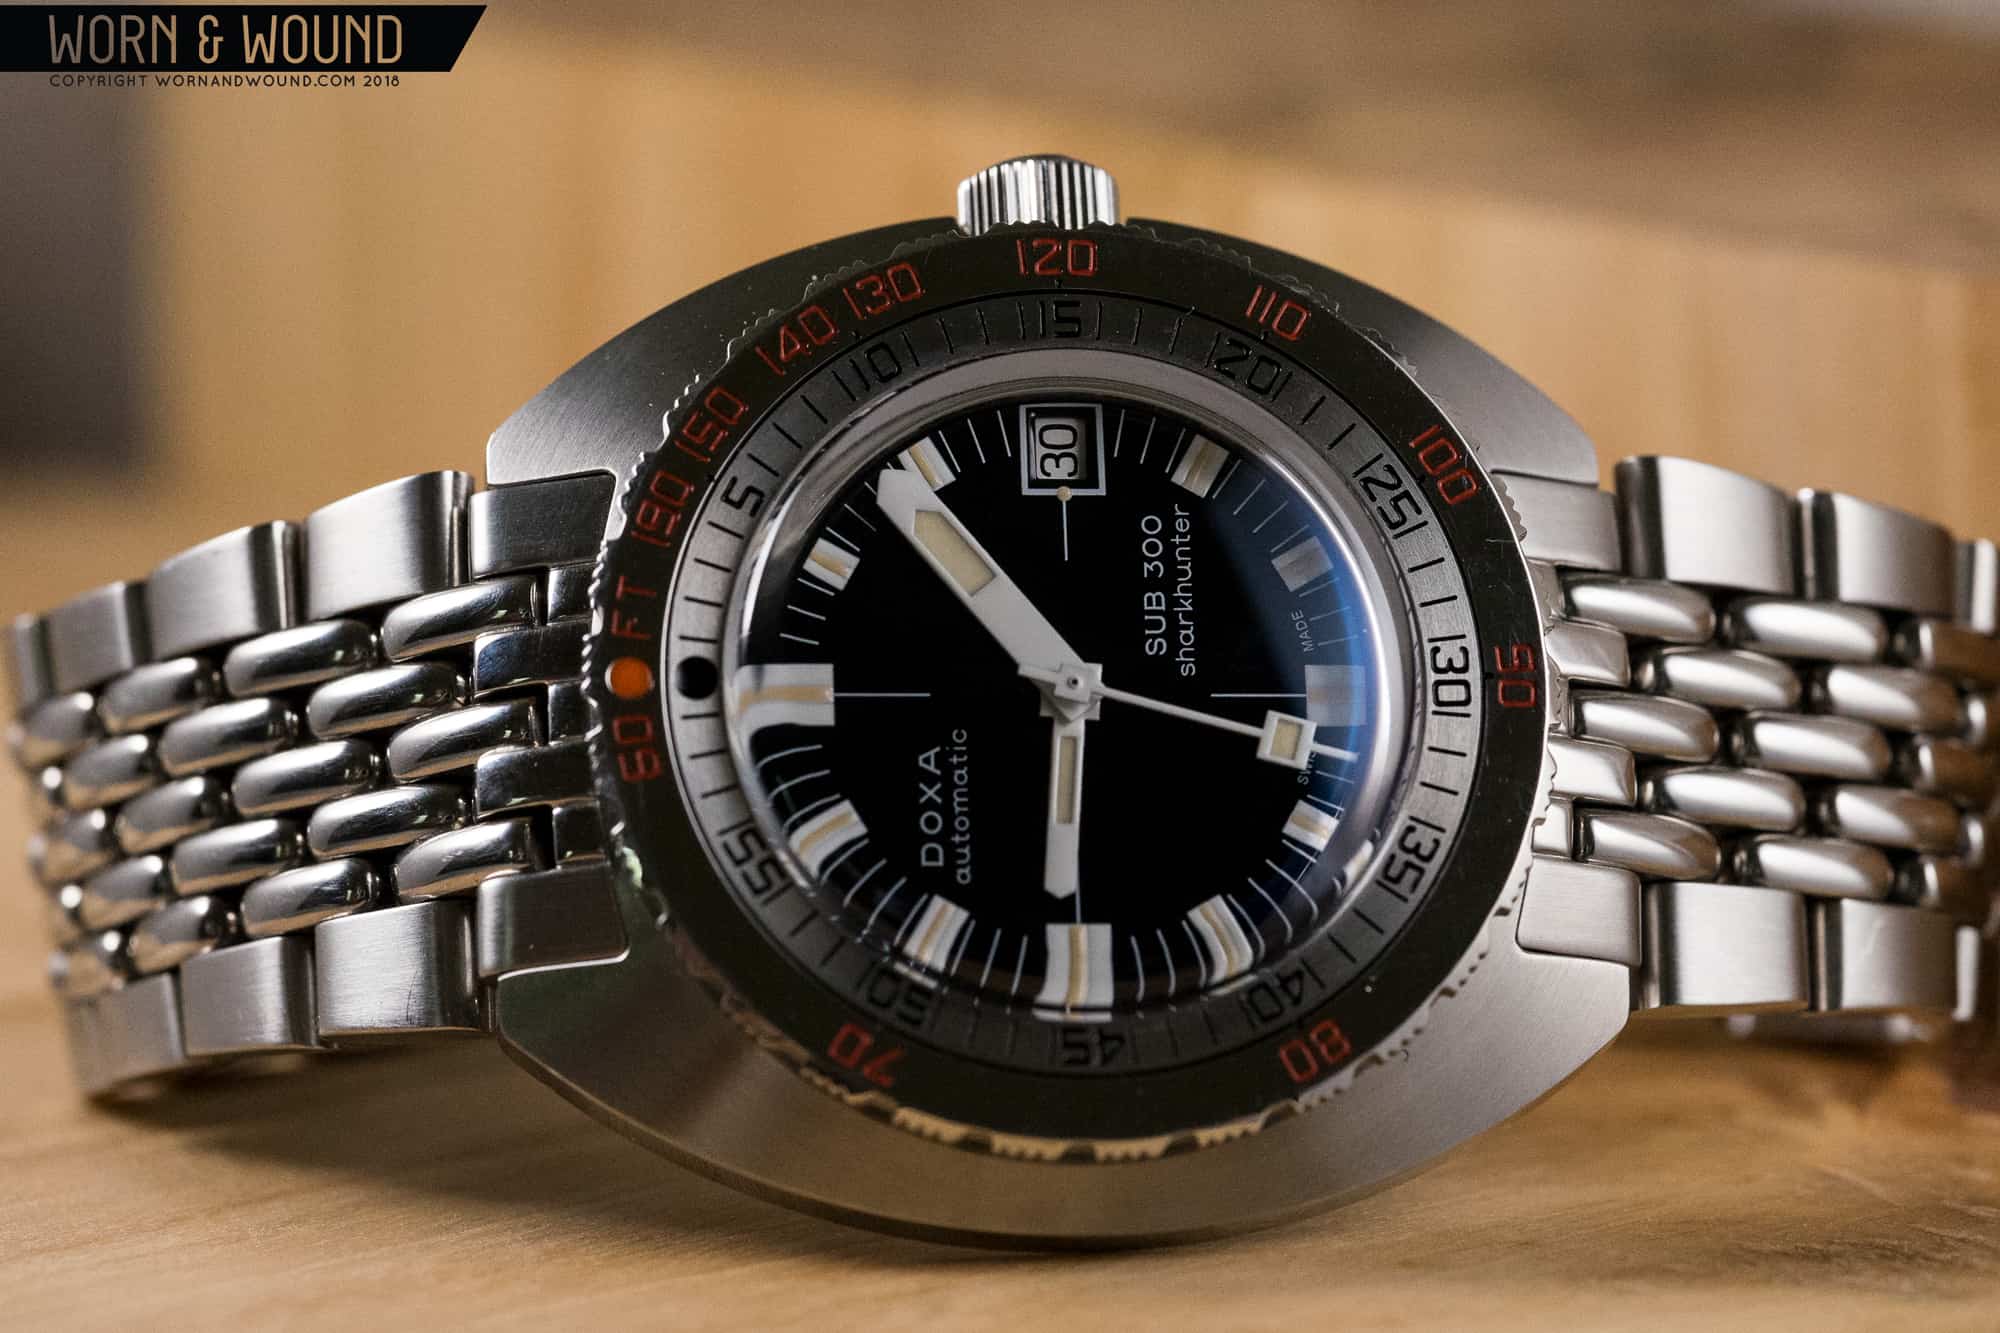 Review: Doxa's SUB-300 Sharkhunter Above and Below The Atlantic - Worn ...